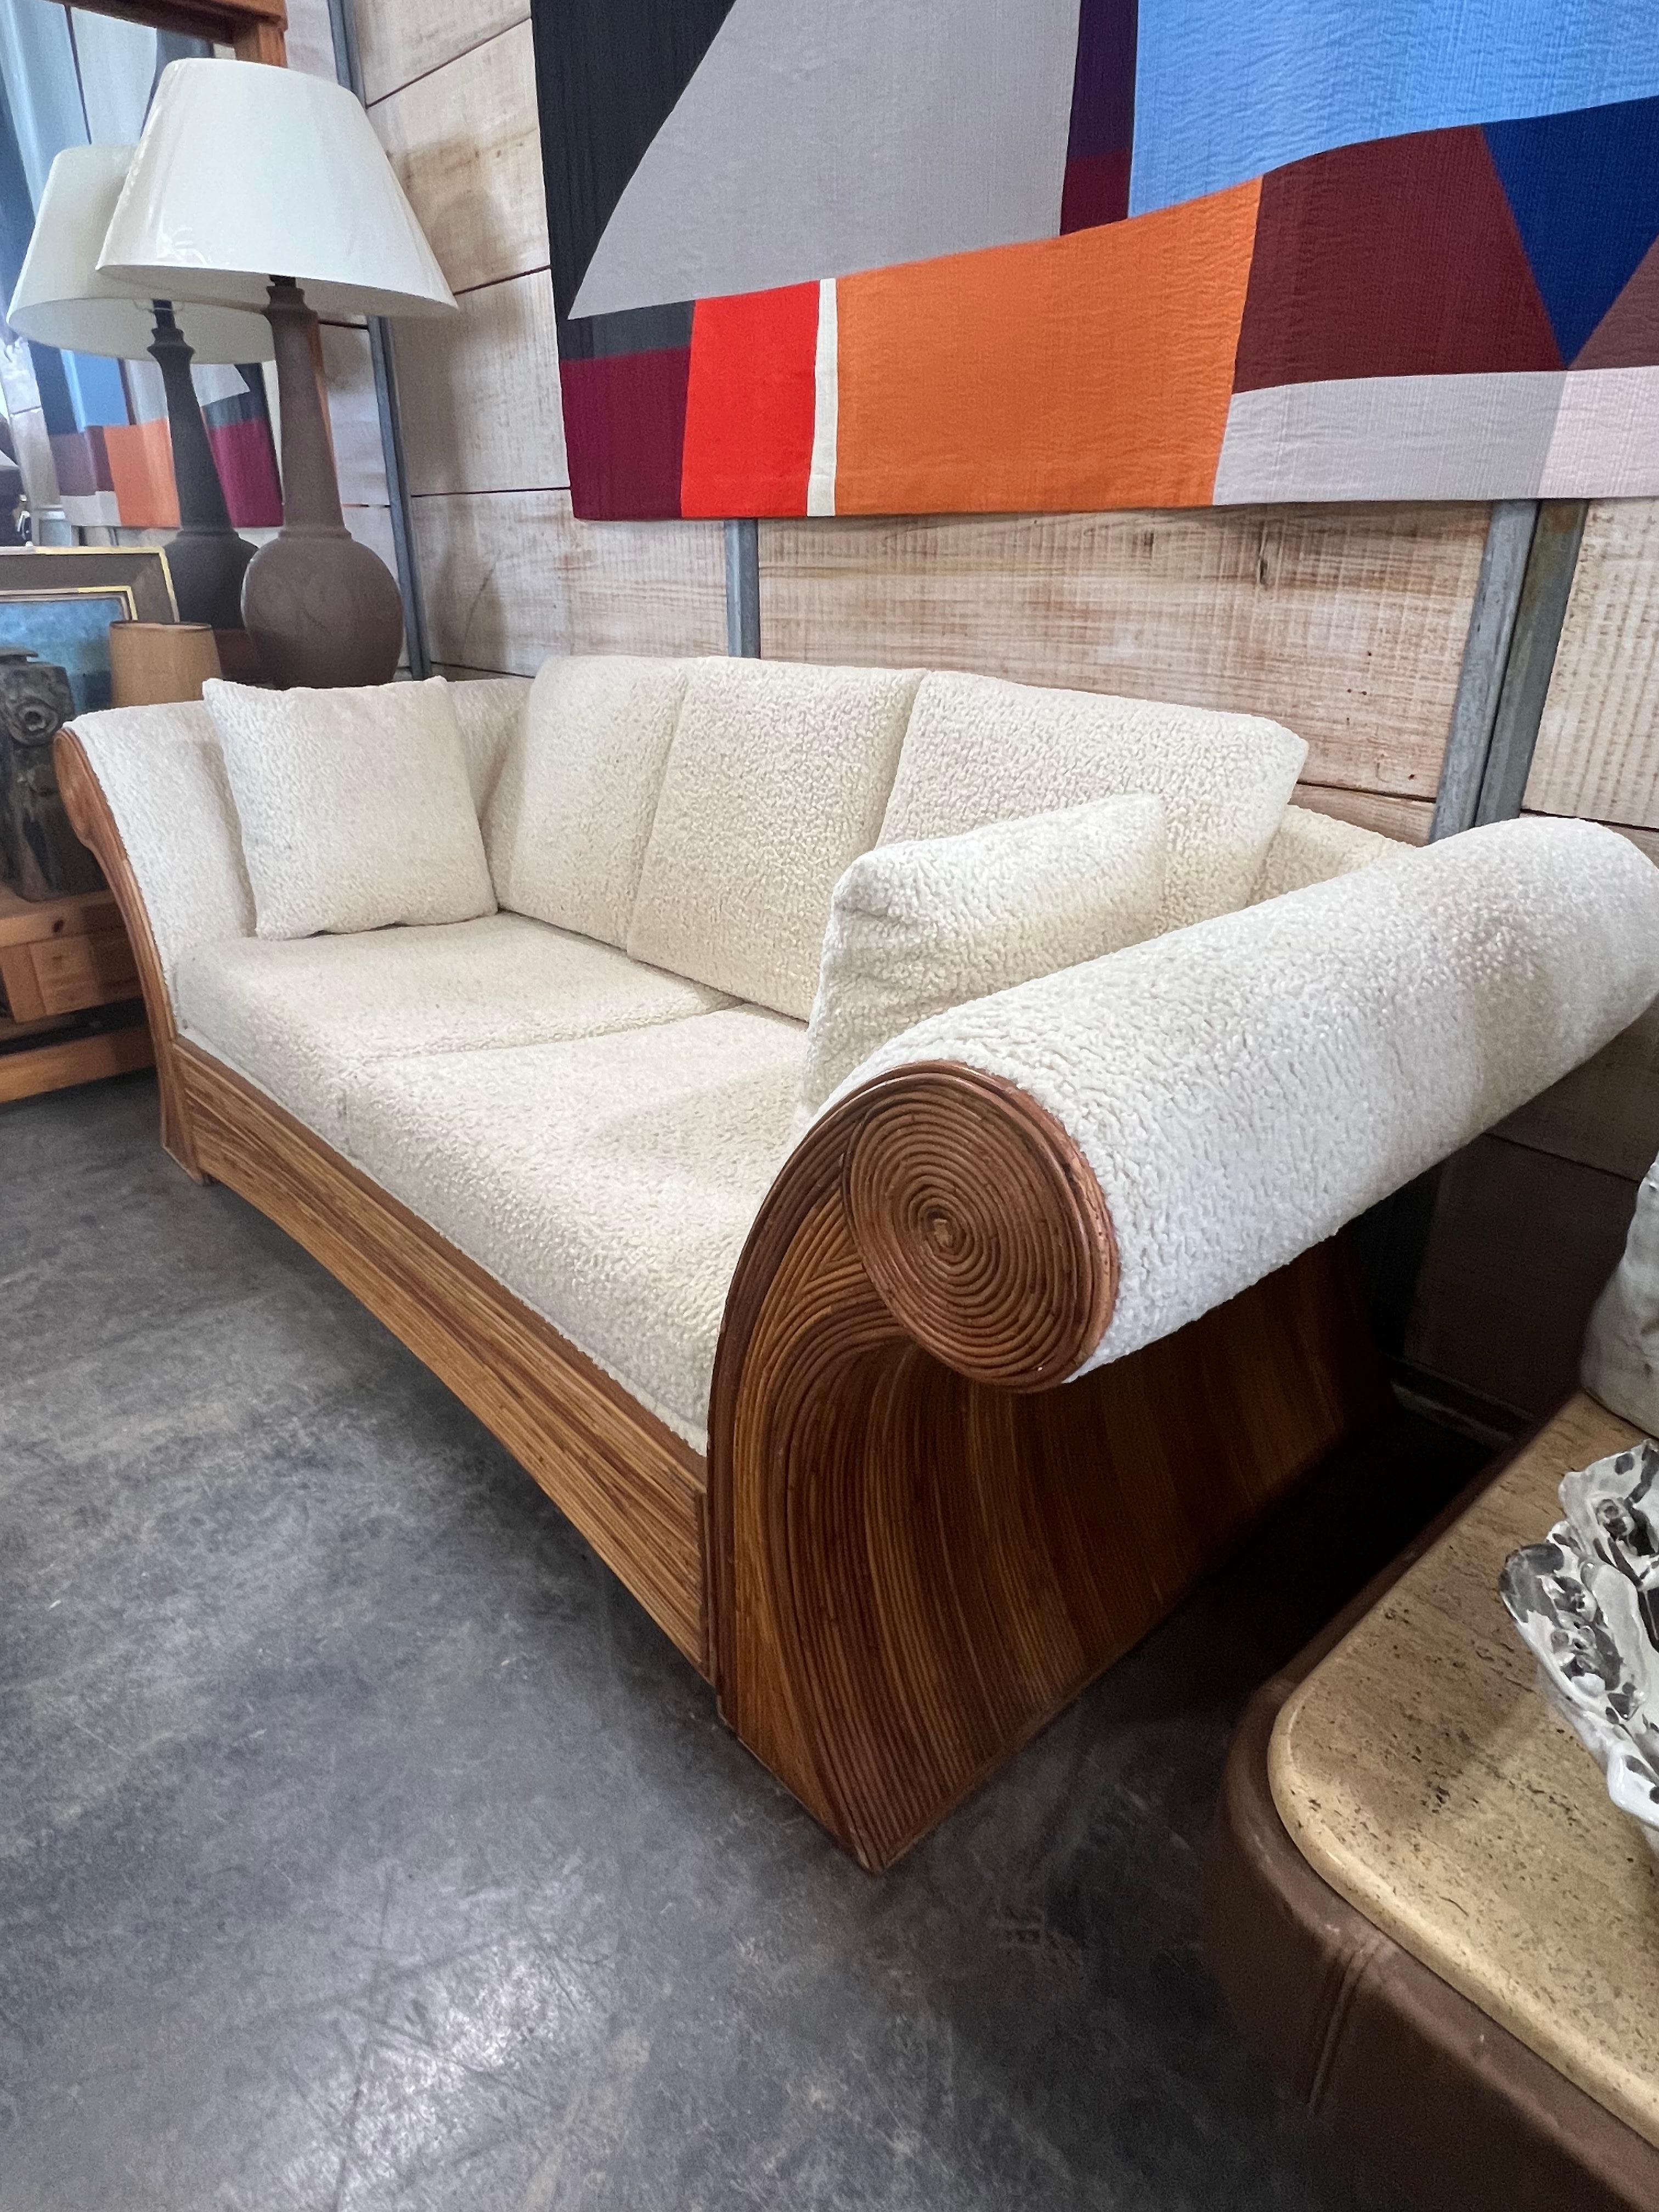 1960’s Italian pencil Reed sofa with new upholstery.